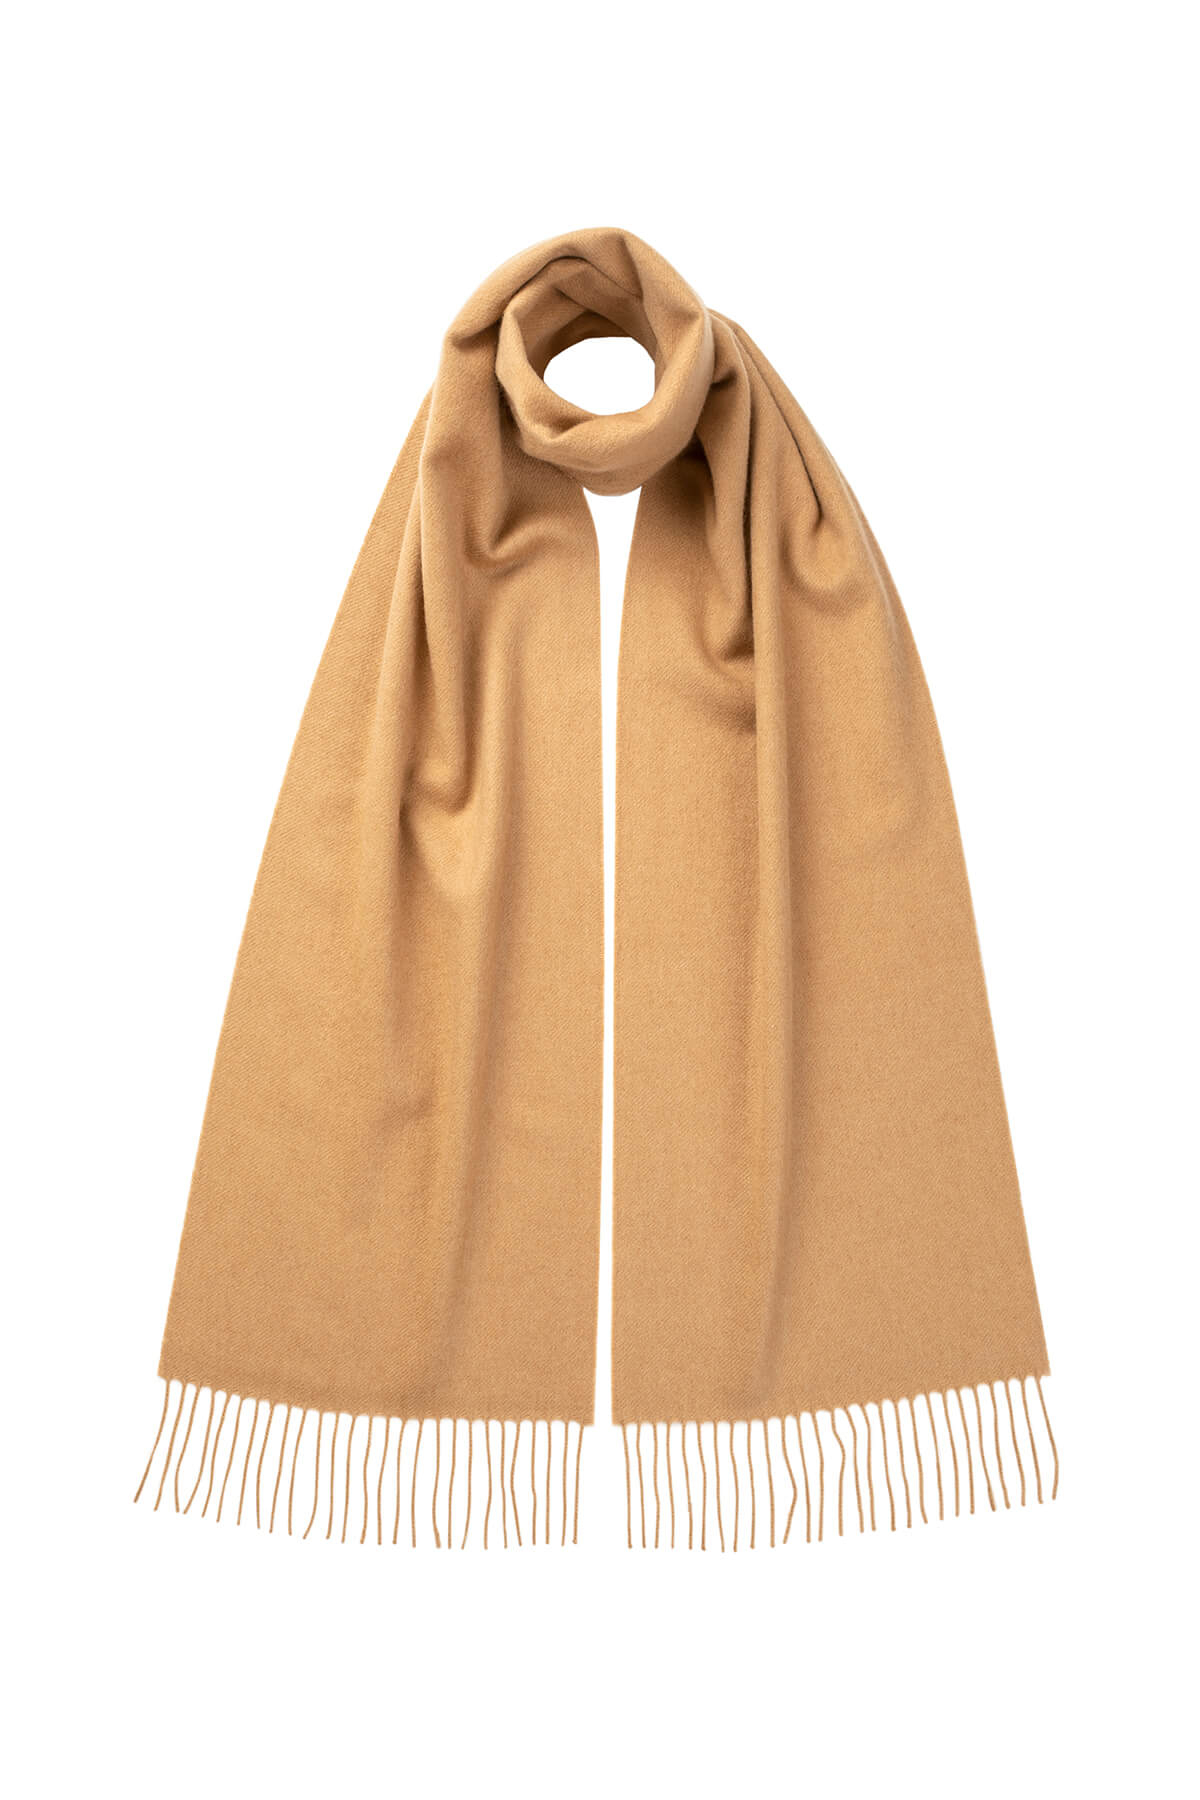 Johnstons of Elgin Cashmere Scarf in Camel on a white background WA000016HB4315ONE